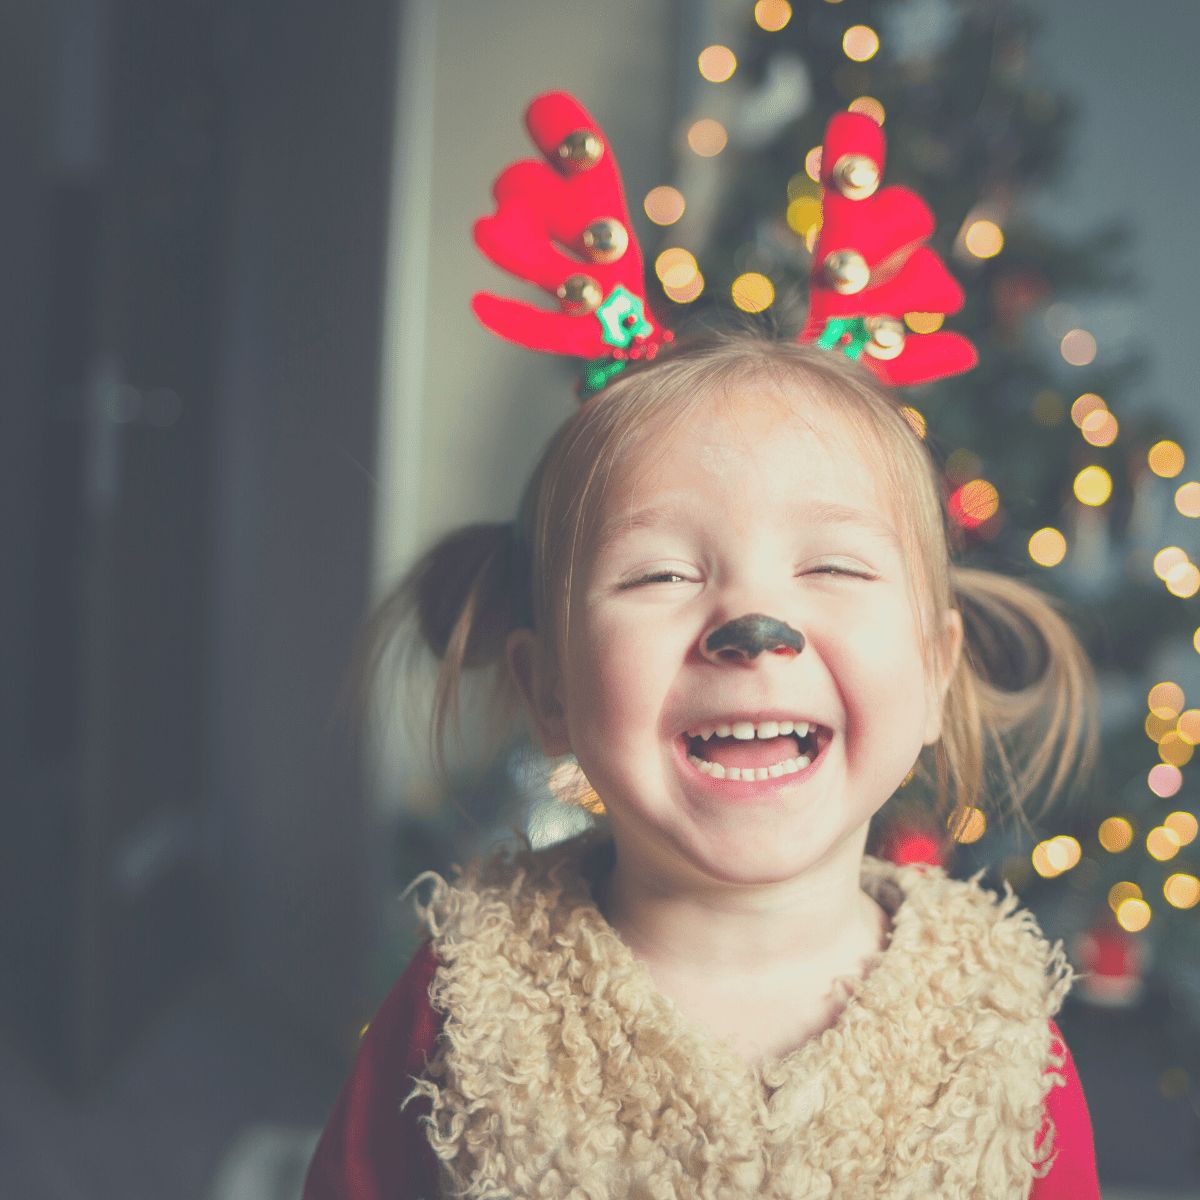 Little girl wearing antlers with a painted reindeer nose laughing as she hears Would You Rather Christmas questions.